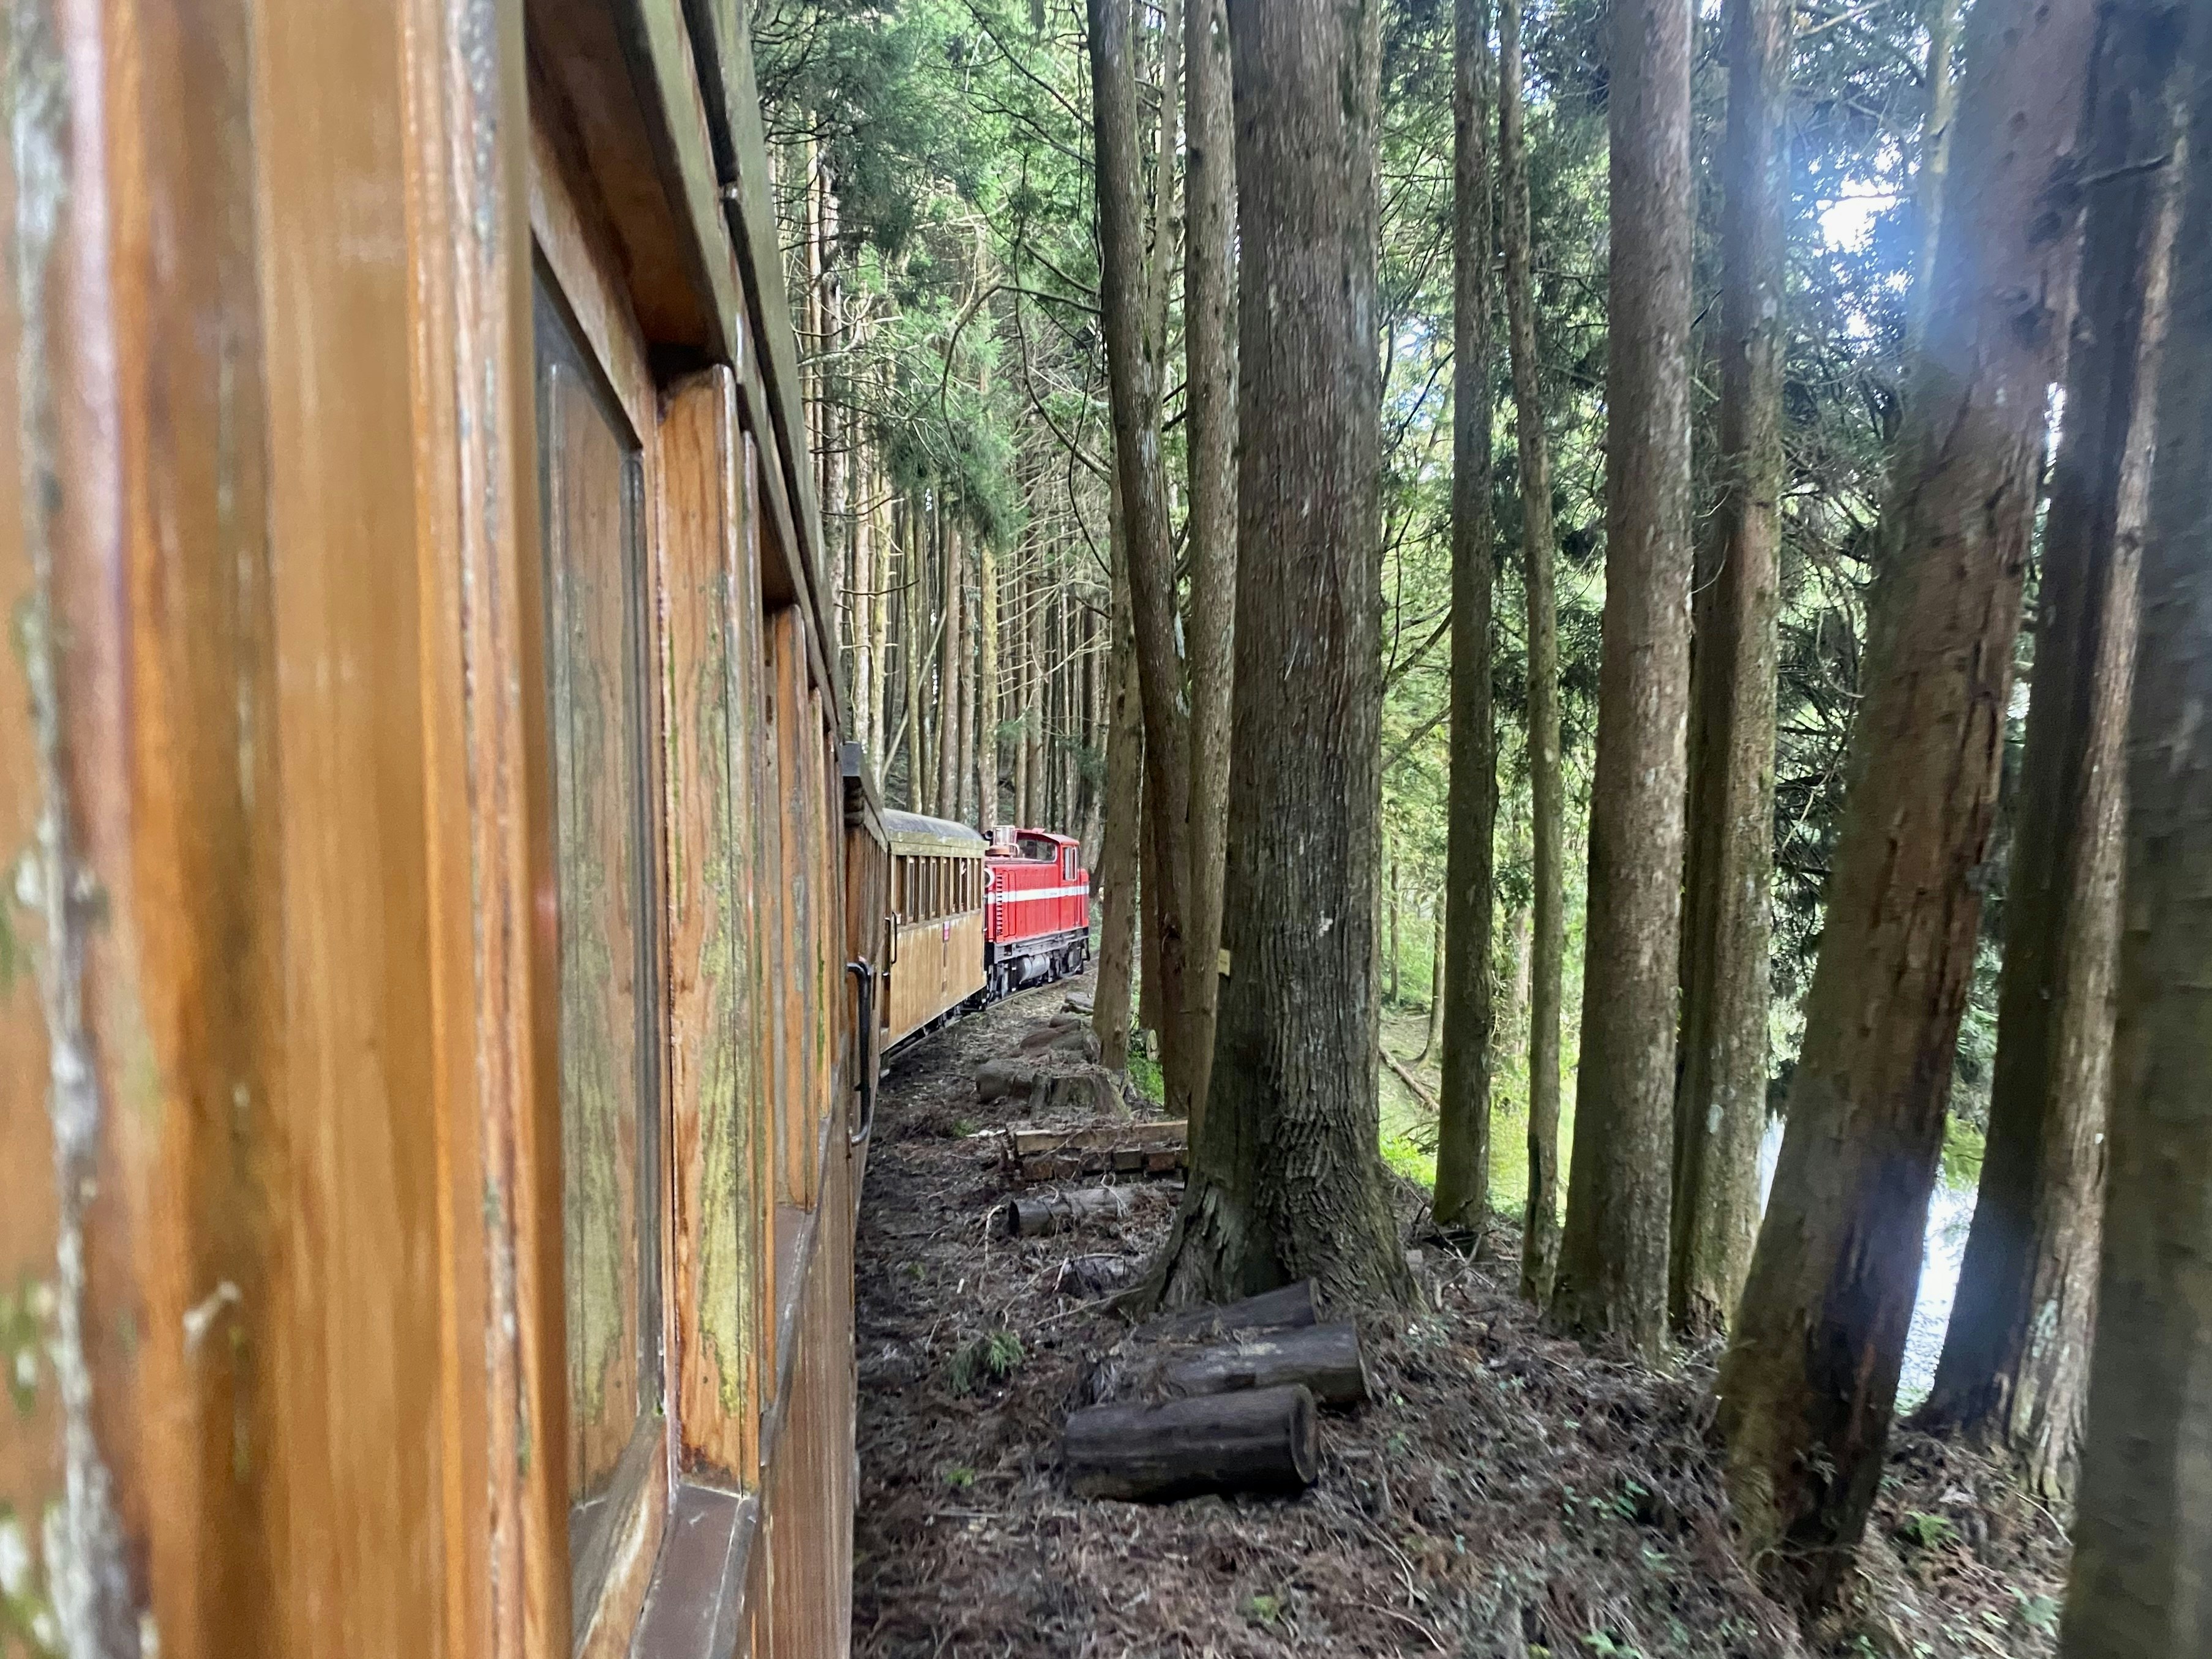 The Alishan Forest Railway approaches Zhaoping station, Taiwan